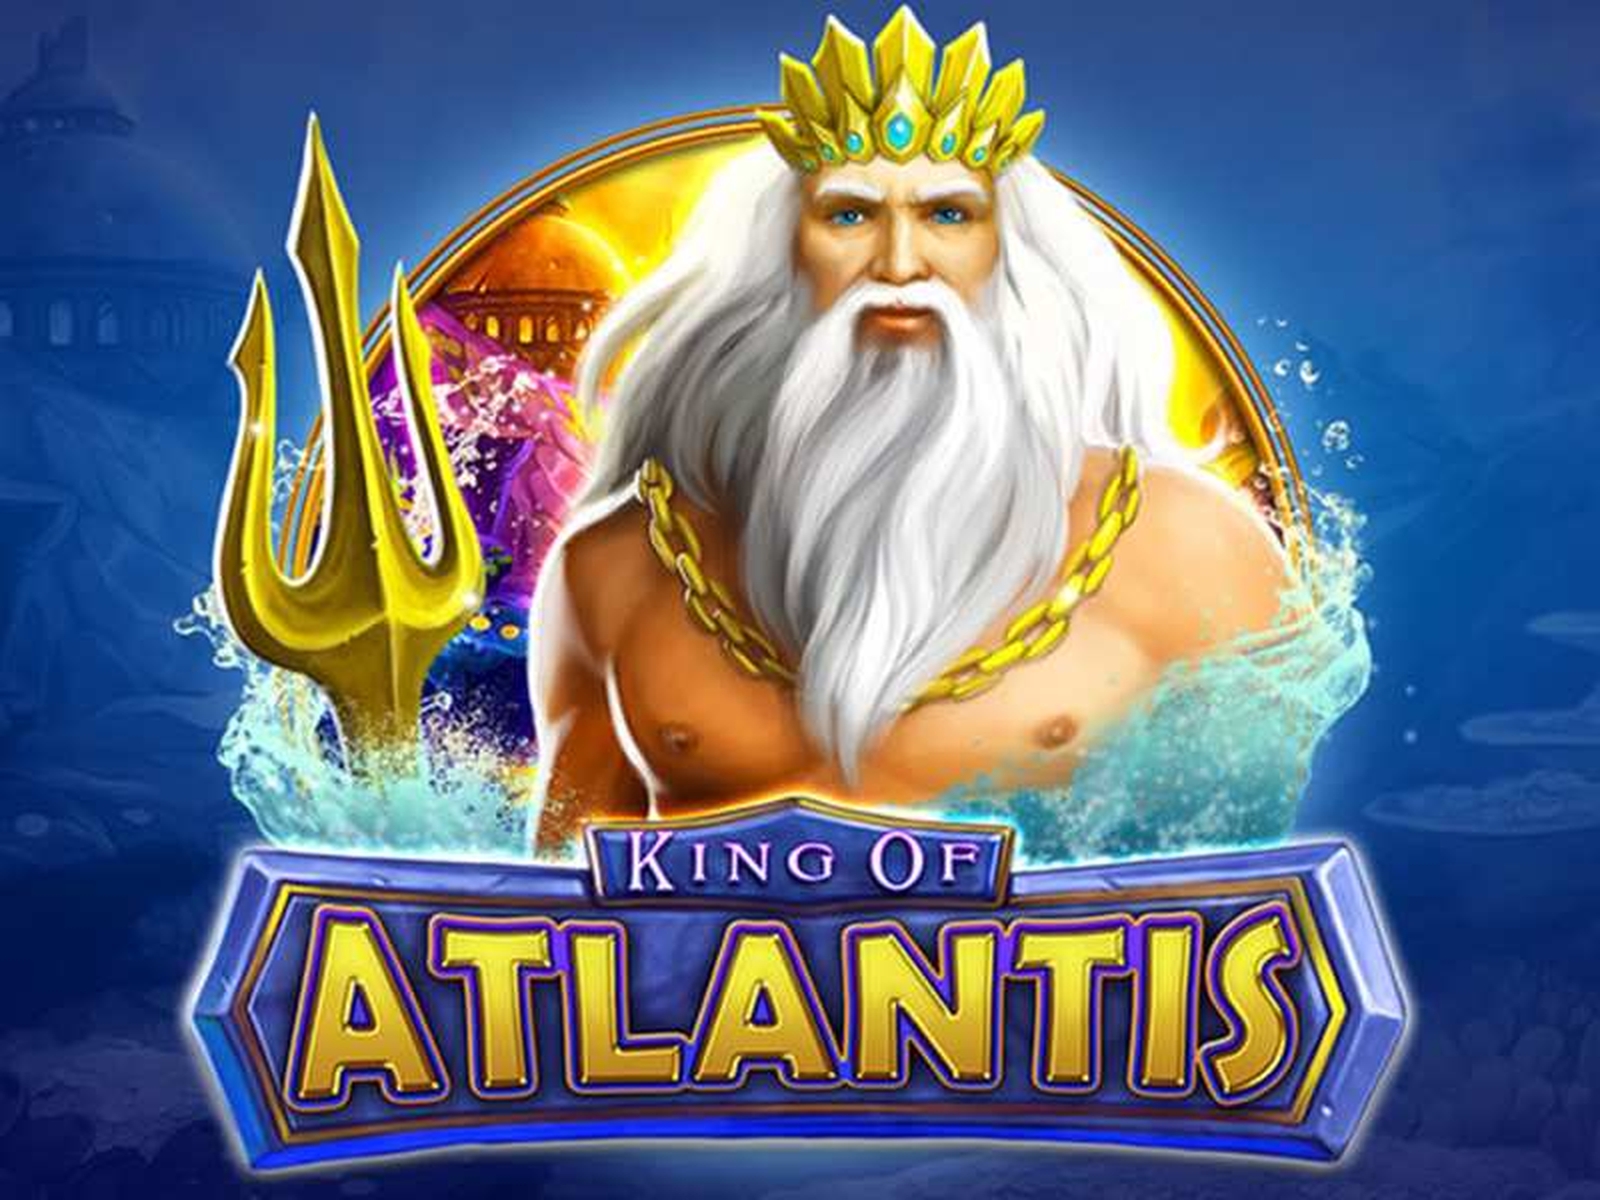 The King of atlantis Online Slot Demo Game by IGT